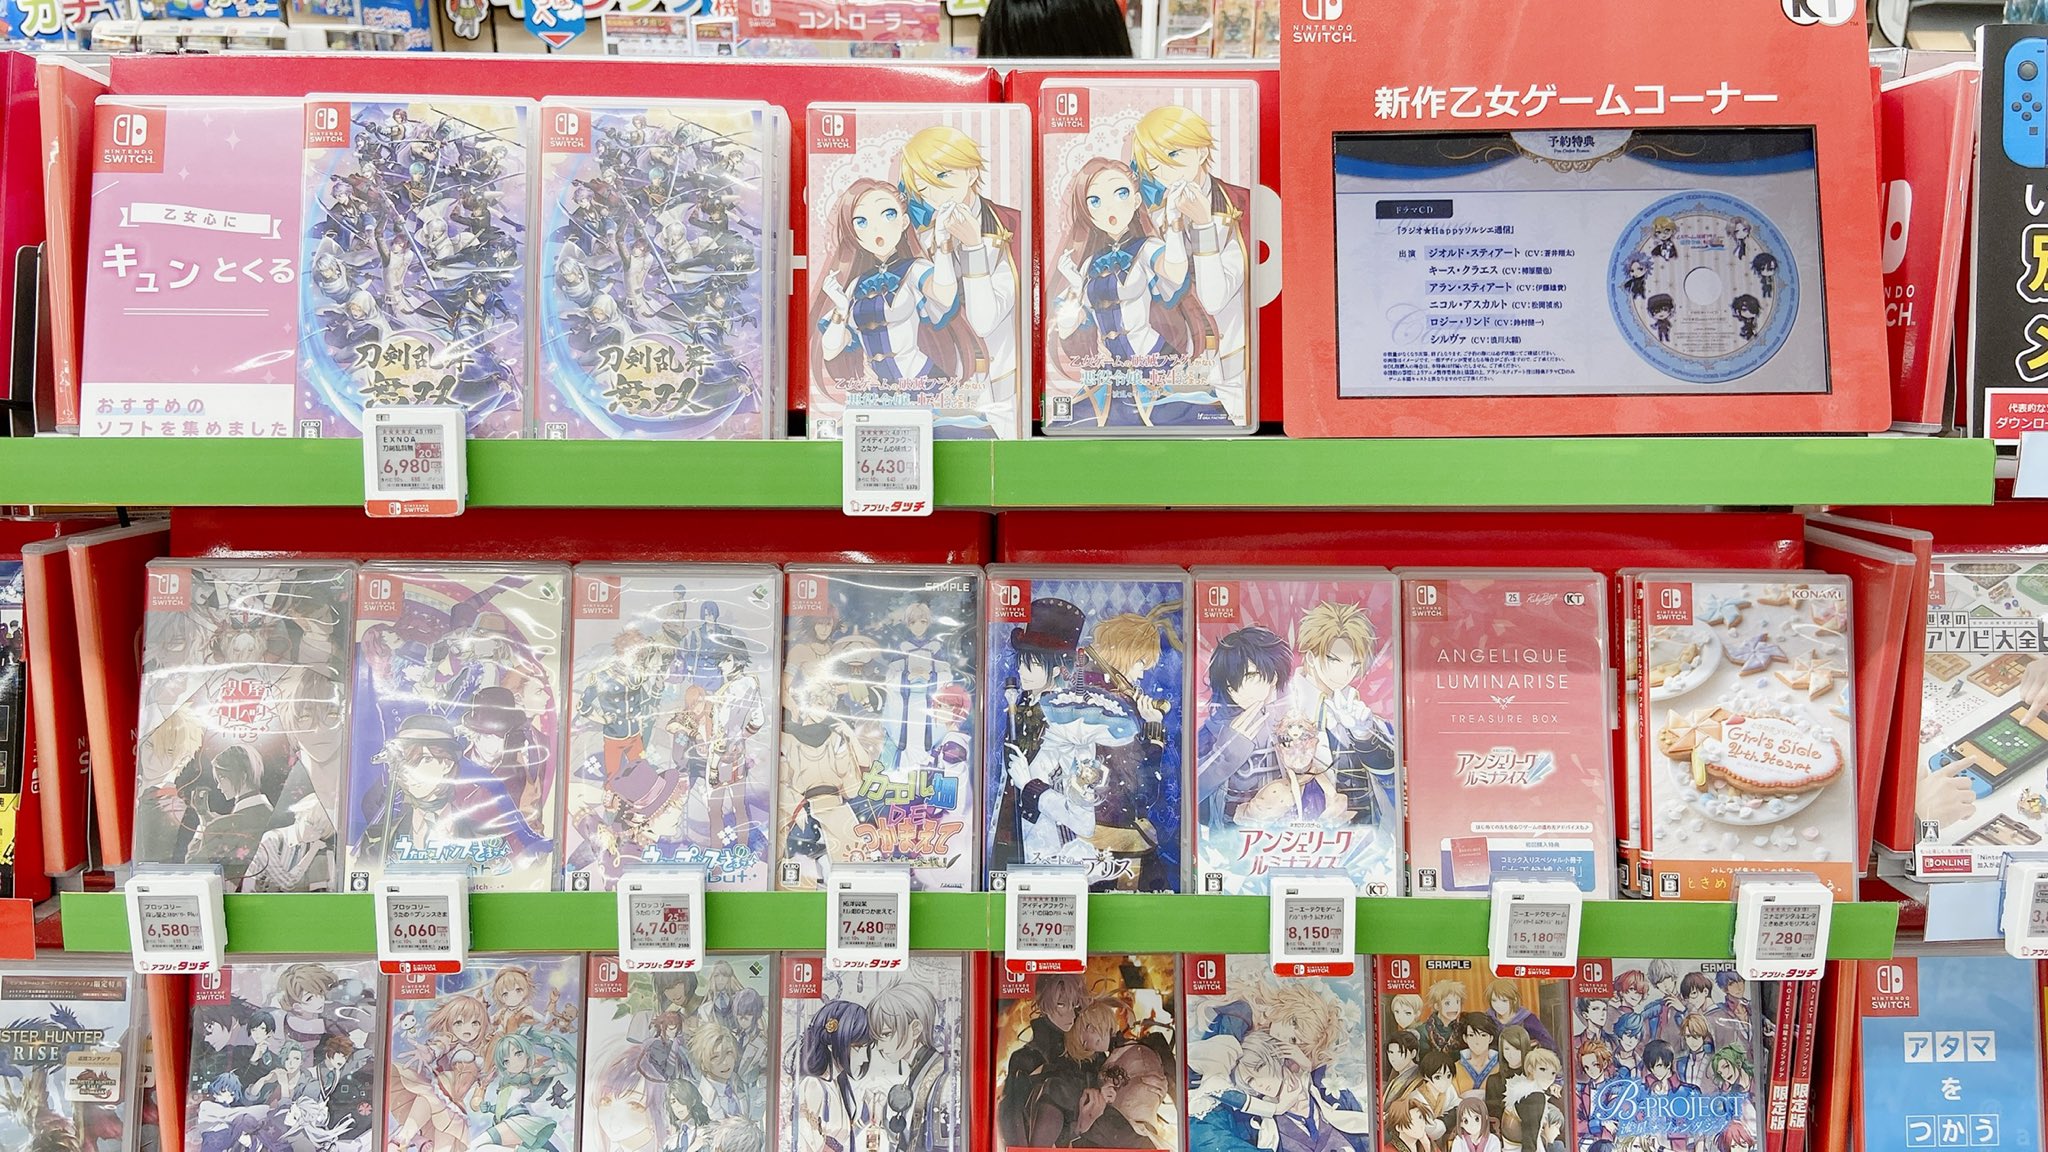 Otome game section at a Japanese game store